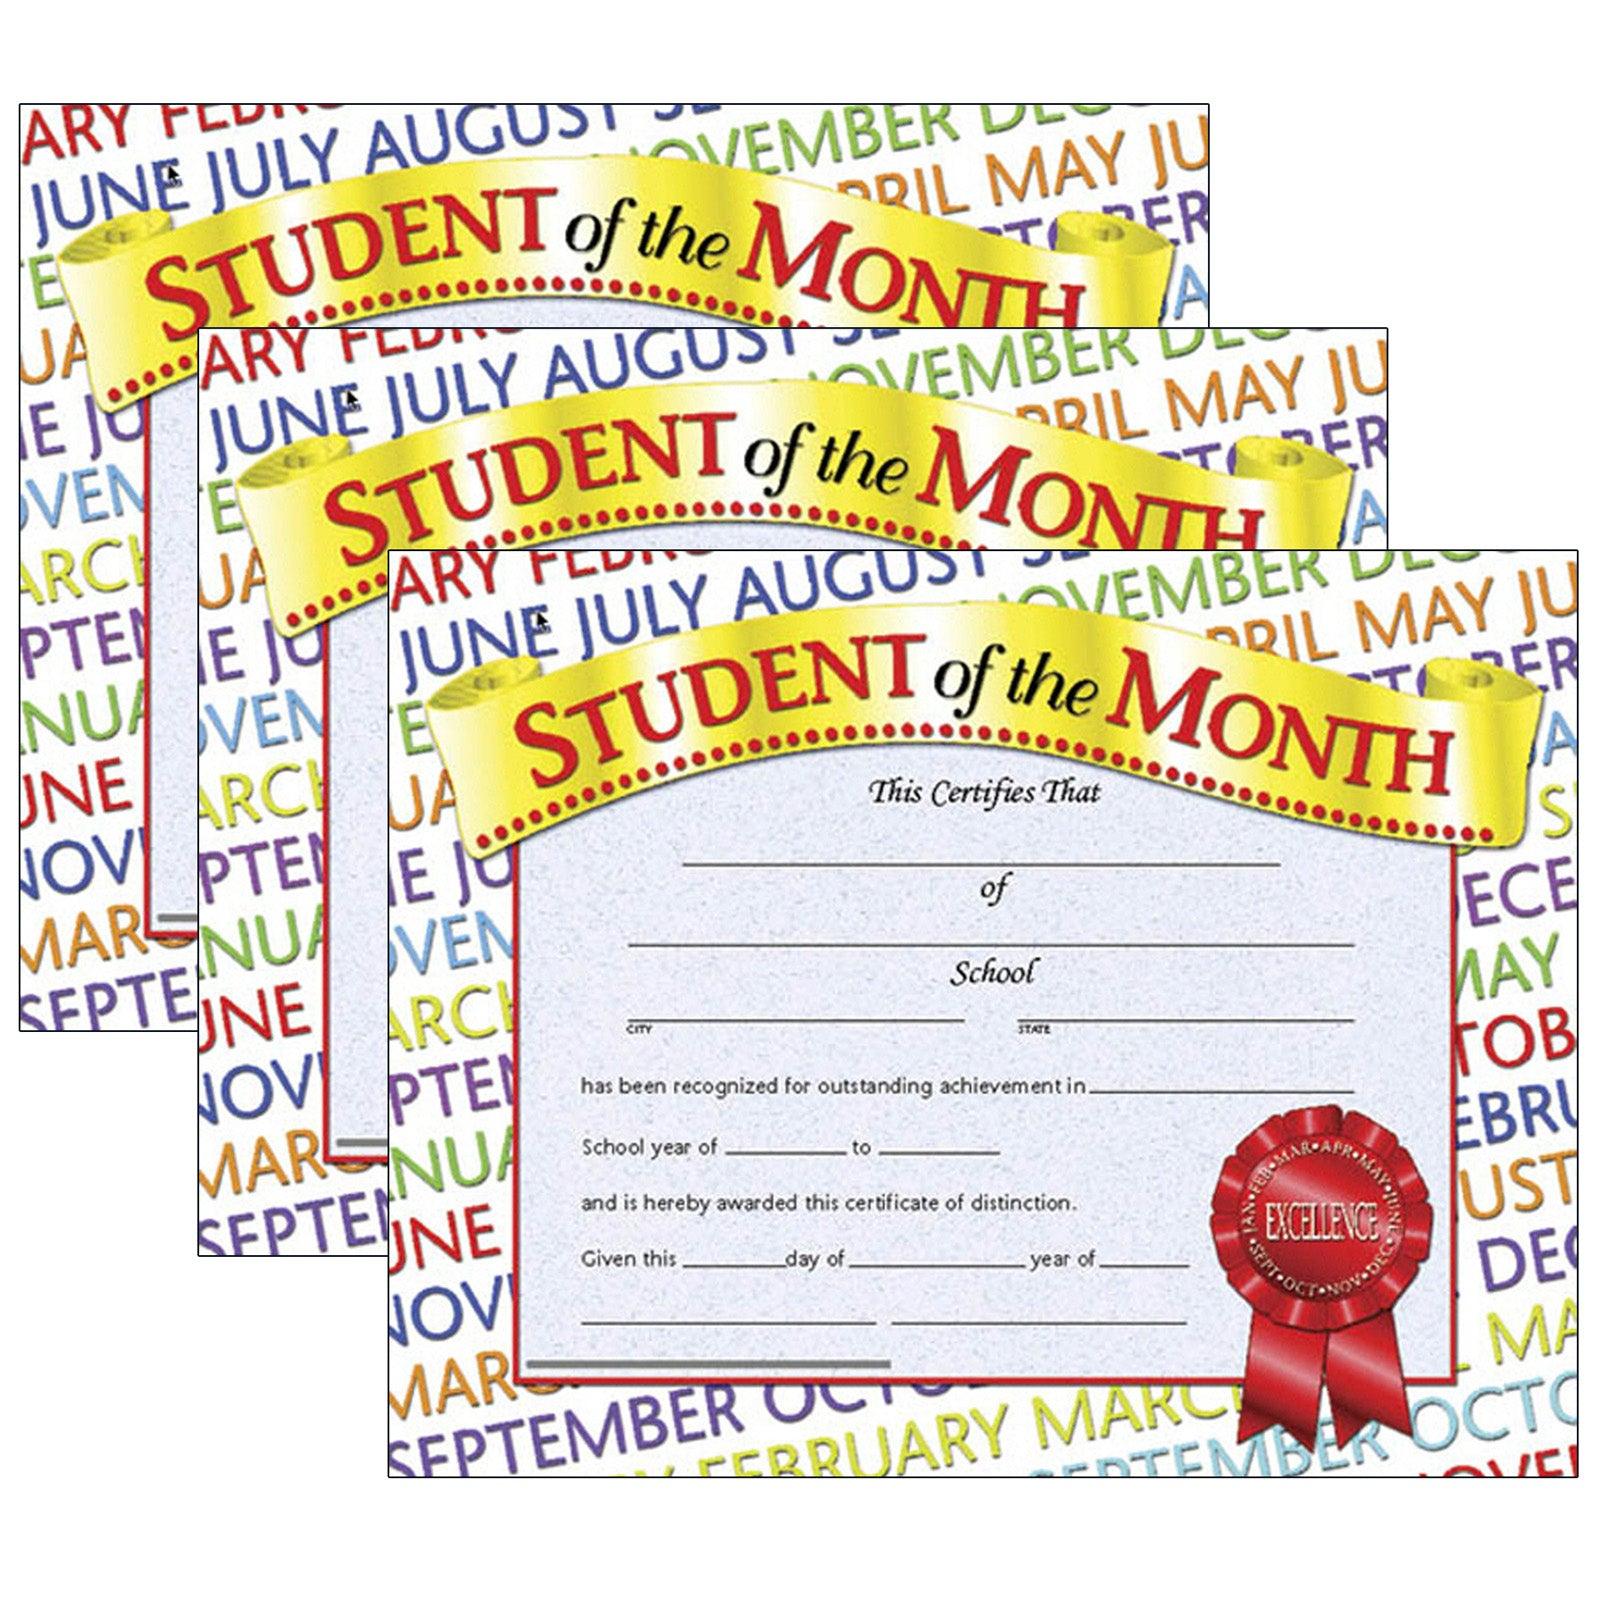 Student of the Month Certificate, 8.5" x 11", 30 Per Pack, 3 Packs - Loomini